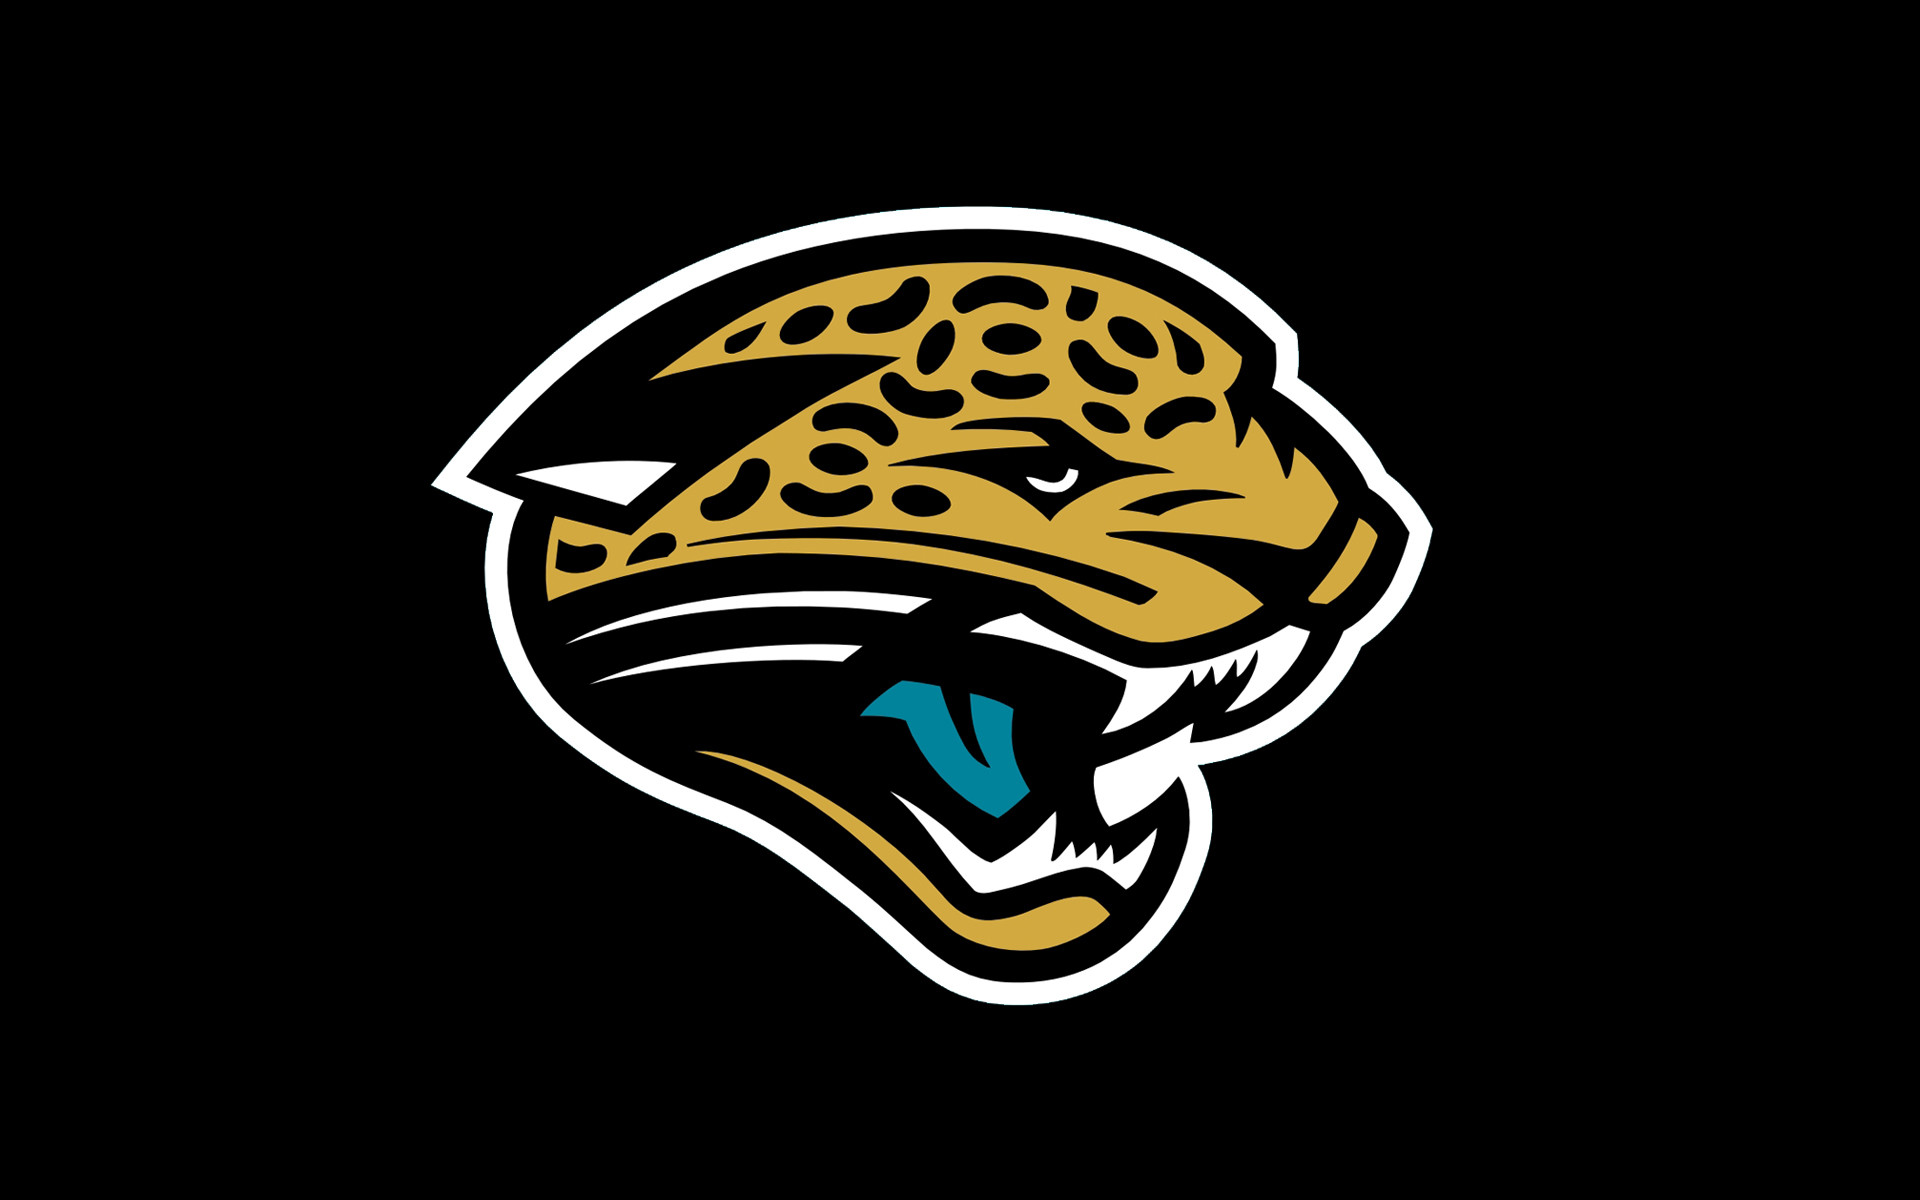 1920x1200 Downloads - jaguars.com For all people who NFL here we have some nice  wallpaper of some .